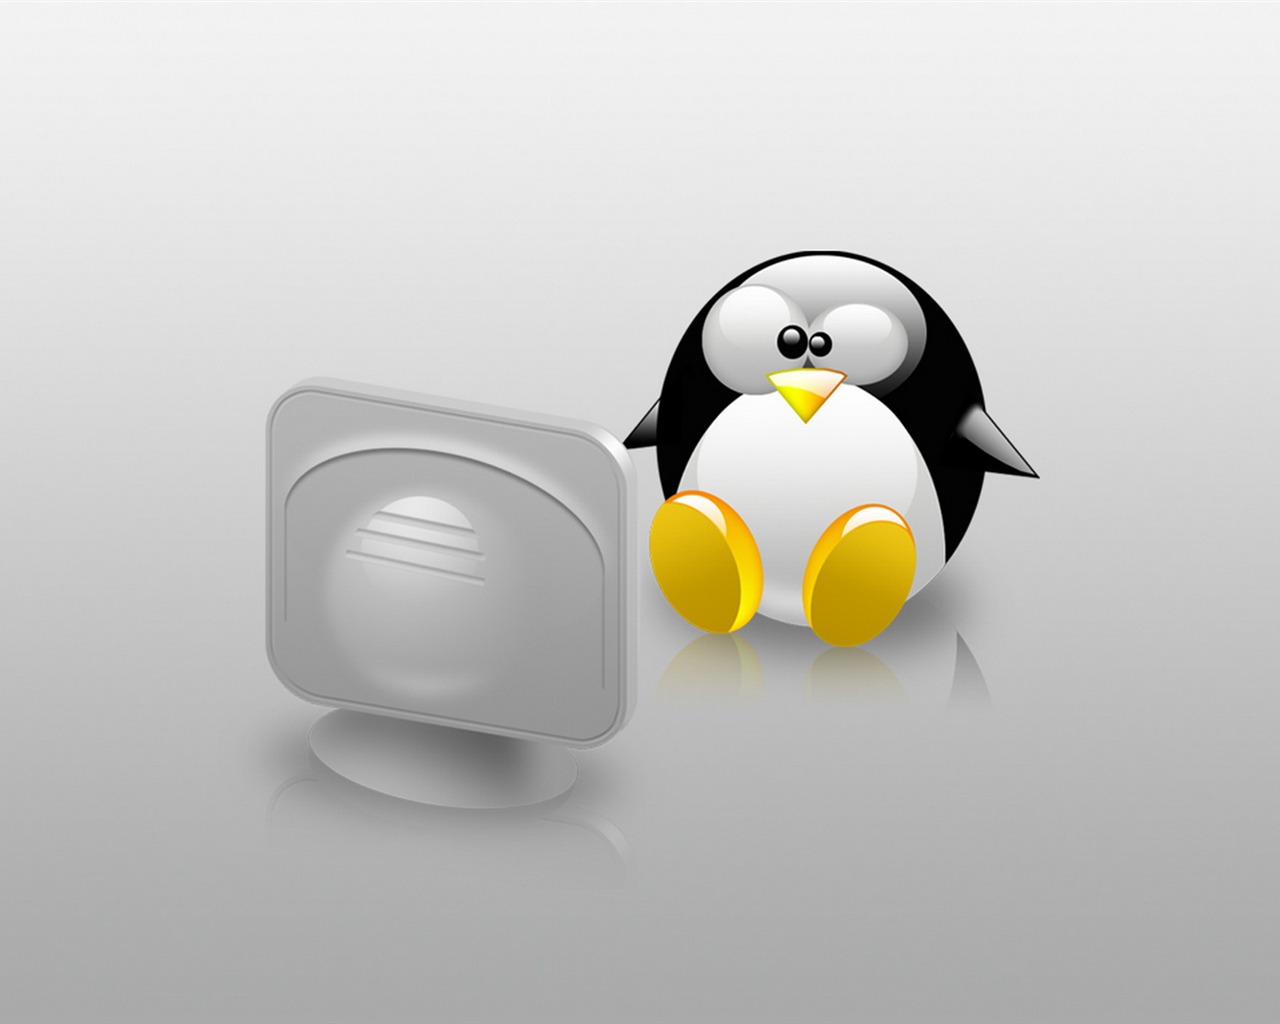 Linux tapety (3) #13 - 1280x1024